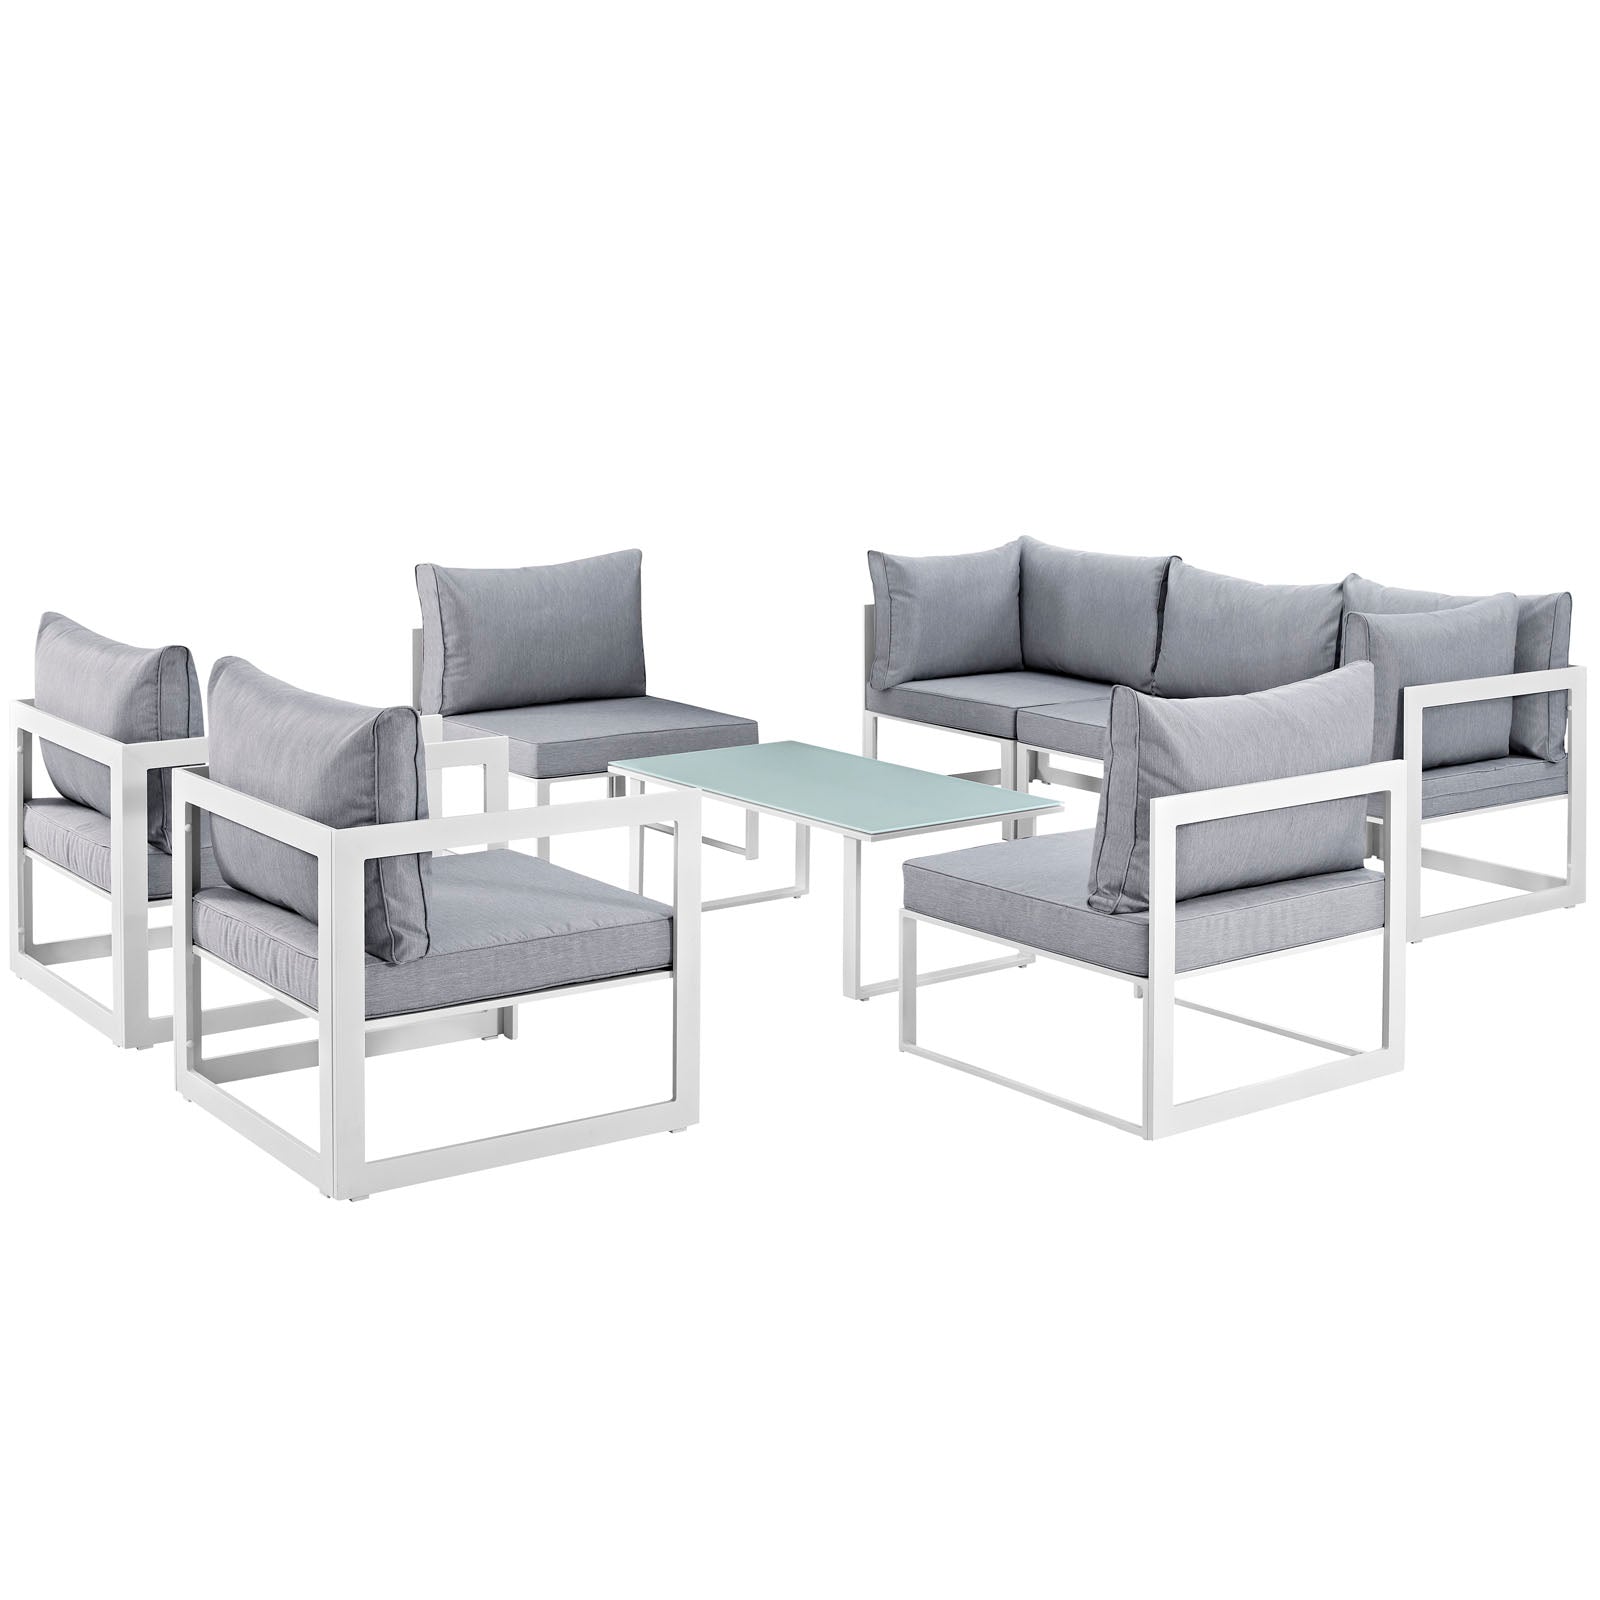 Modway Outdoor Conversation Sets - Fortuna 8 Piece Outdoor 91"W Patio Sectional Sofa Set White Gray